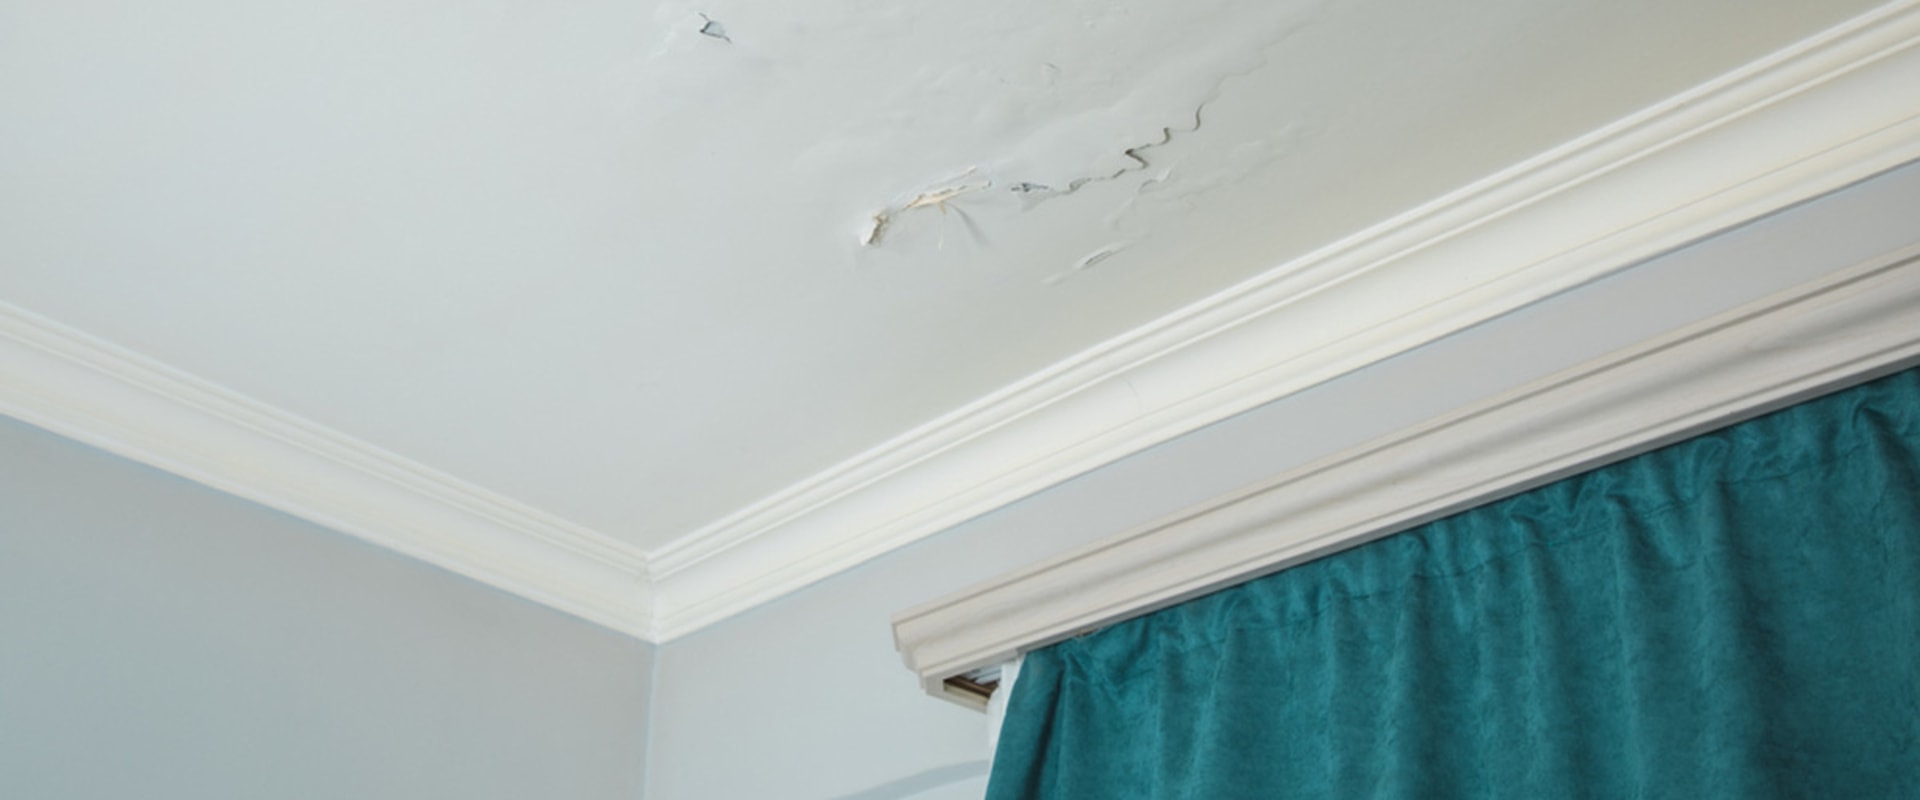 How Long Does it Take for Water Damage to Ceiling?